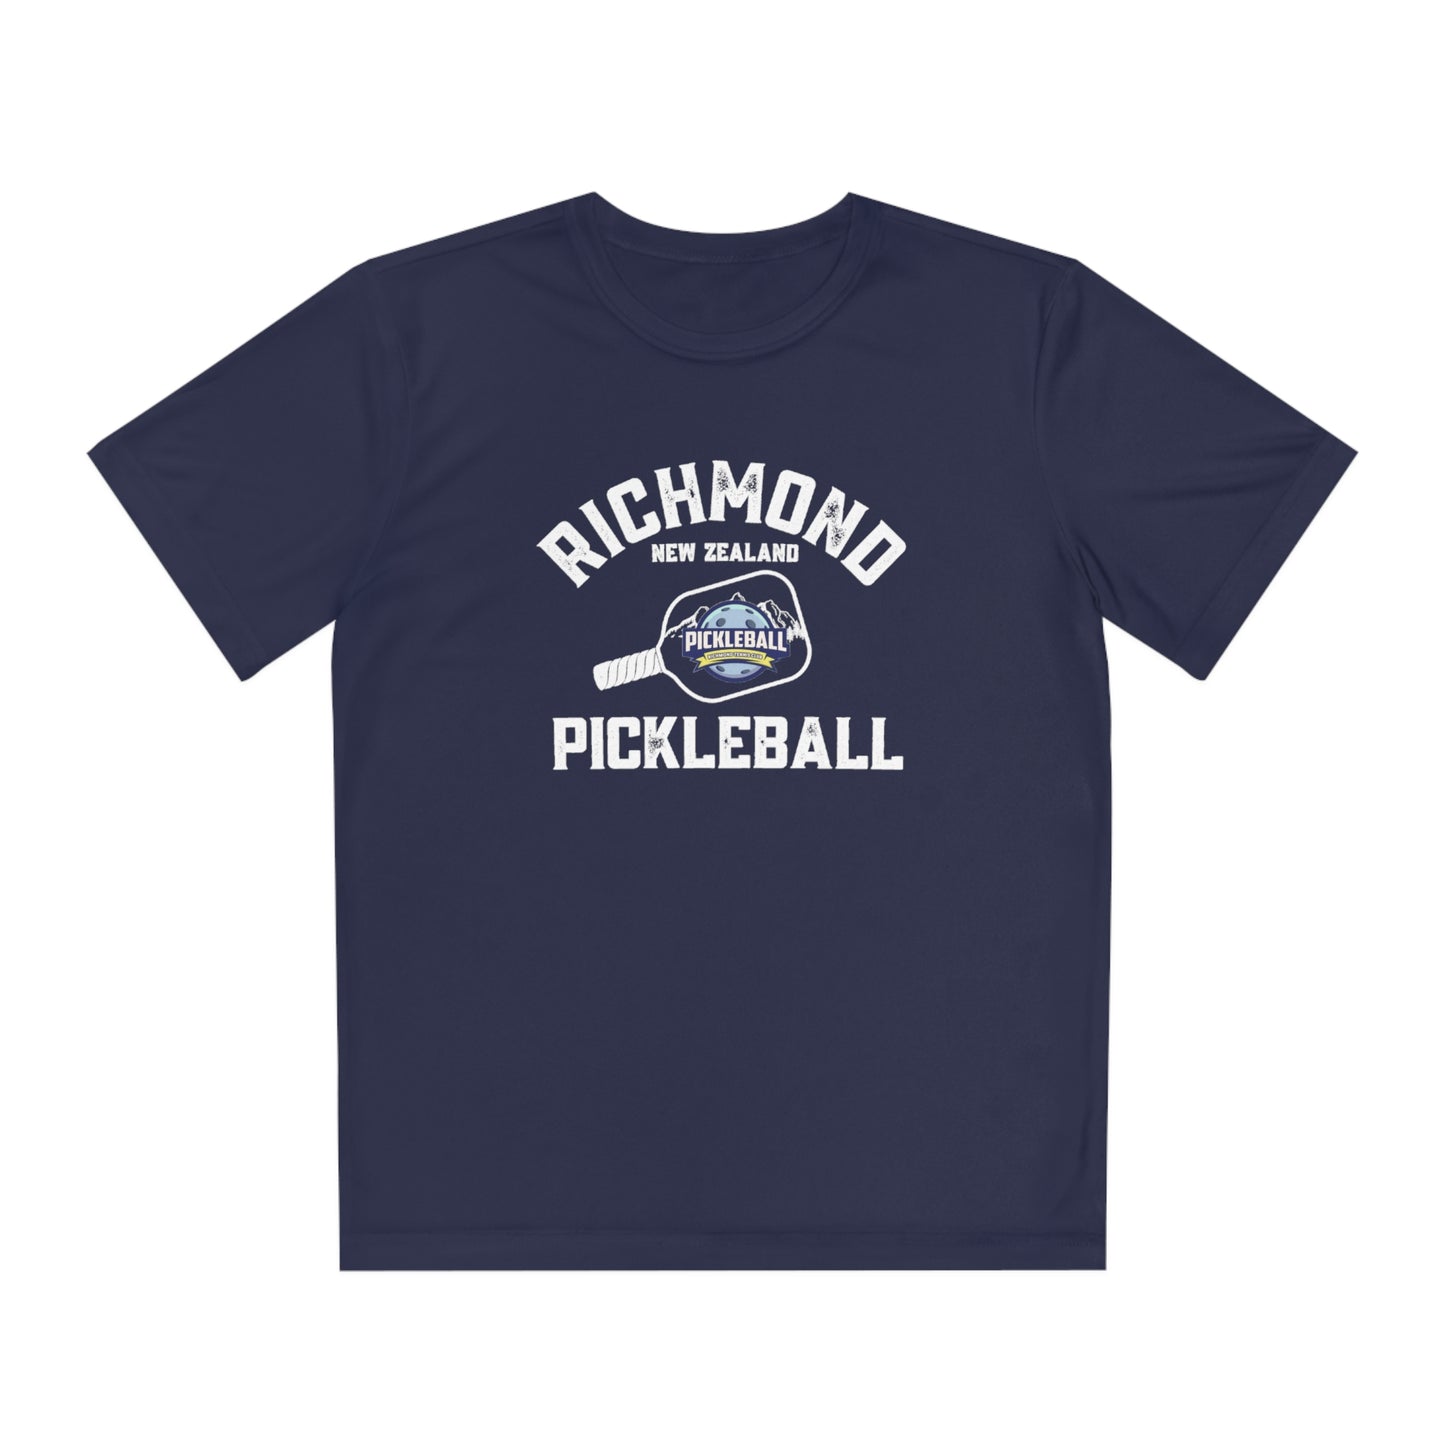 Richmond New Zealand Pickleball - Youth Competitor Tee Moisture Wicking - SPF 40